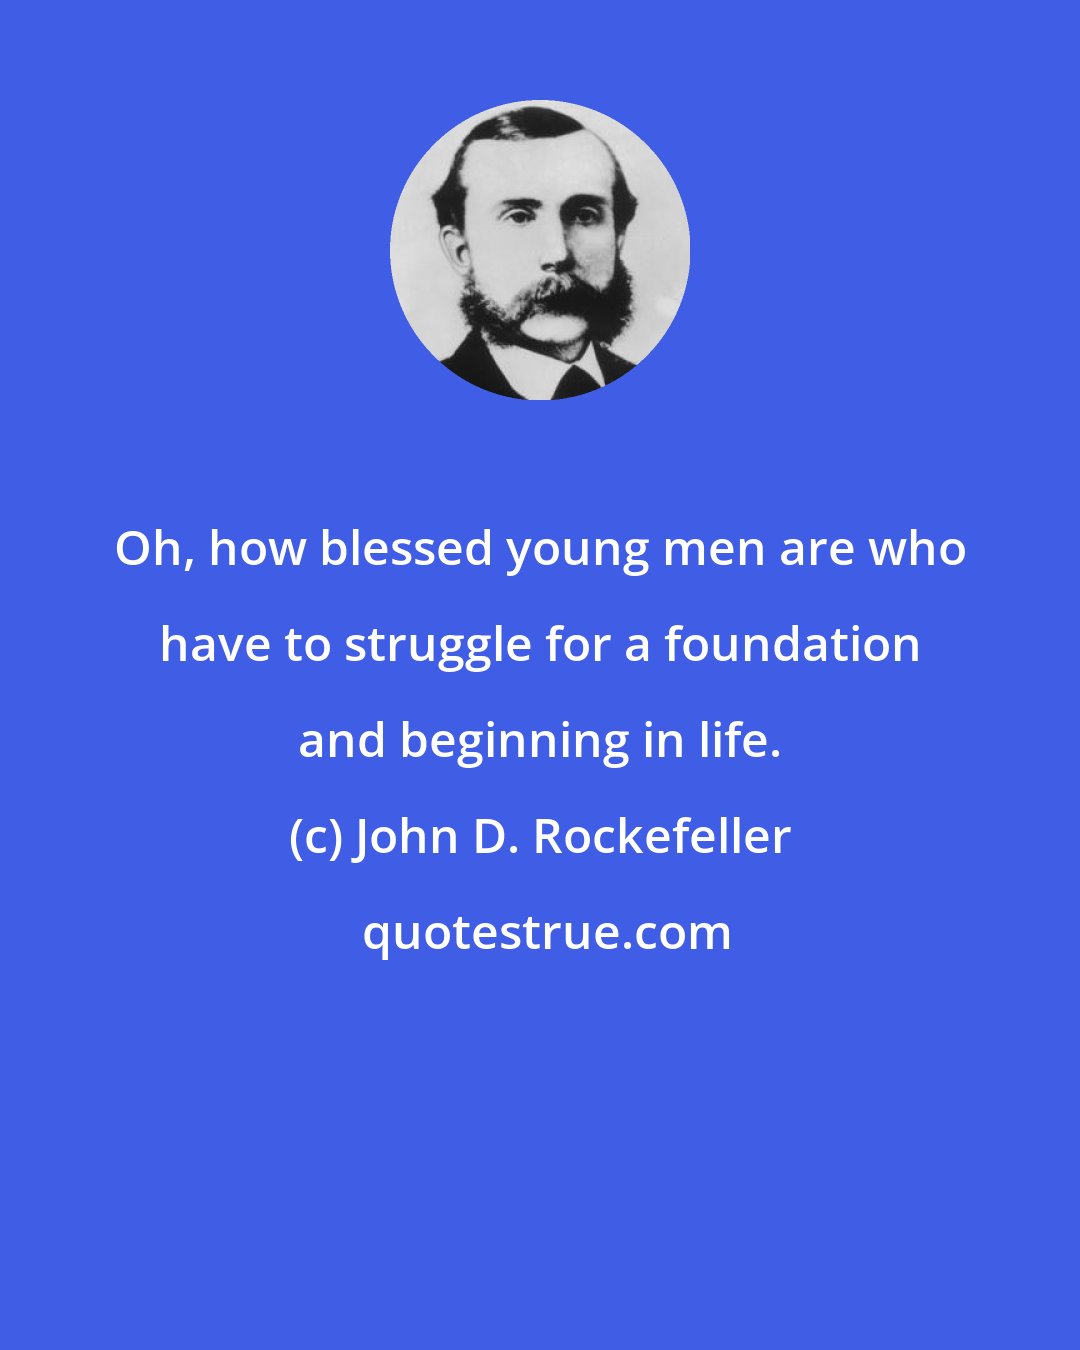 John D. Rockefeller: Oh, how blessed young men are who have to struggle for a foundation and beginning in life.